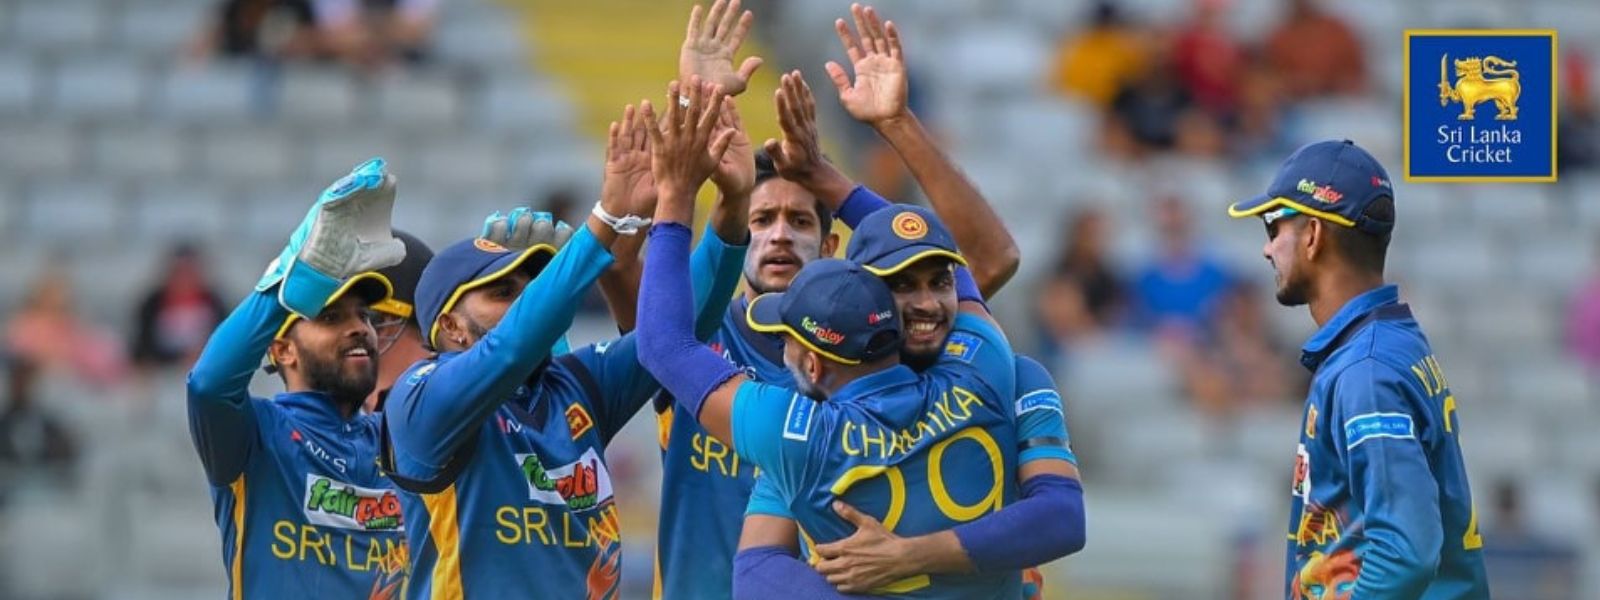 Sri Lanka fined for slow over rate in 1st ODI against New Zealand